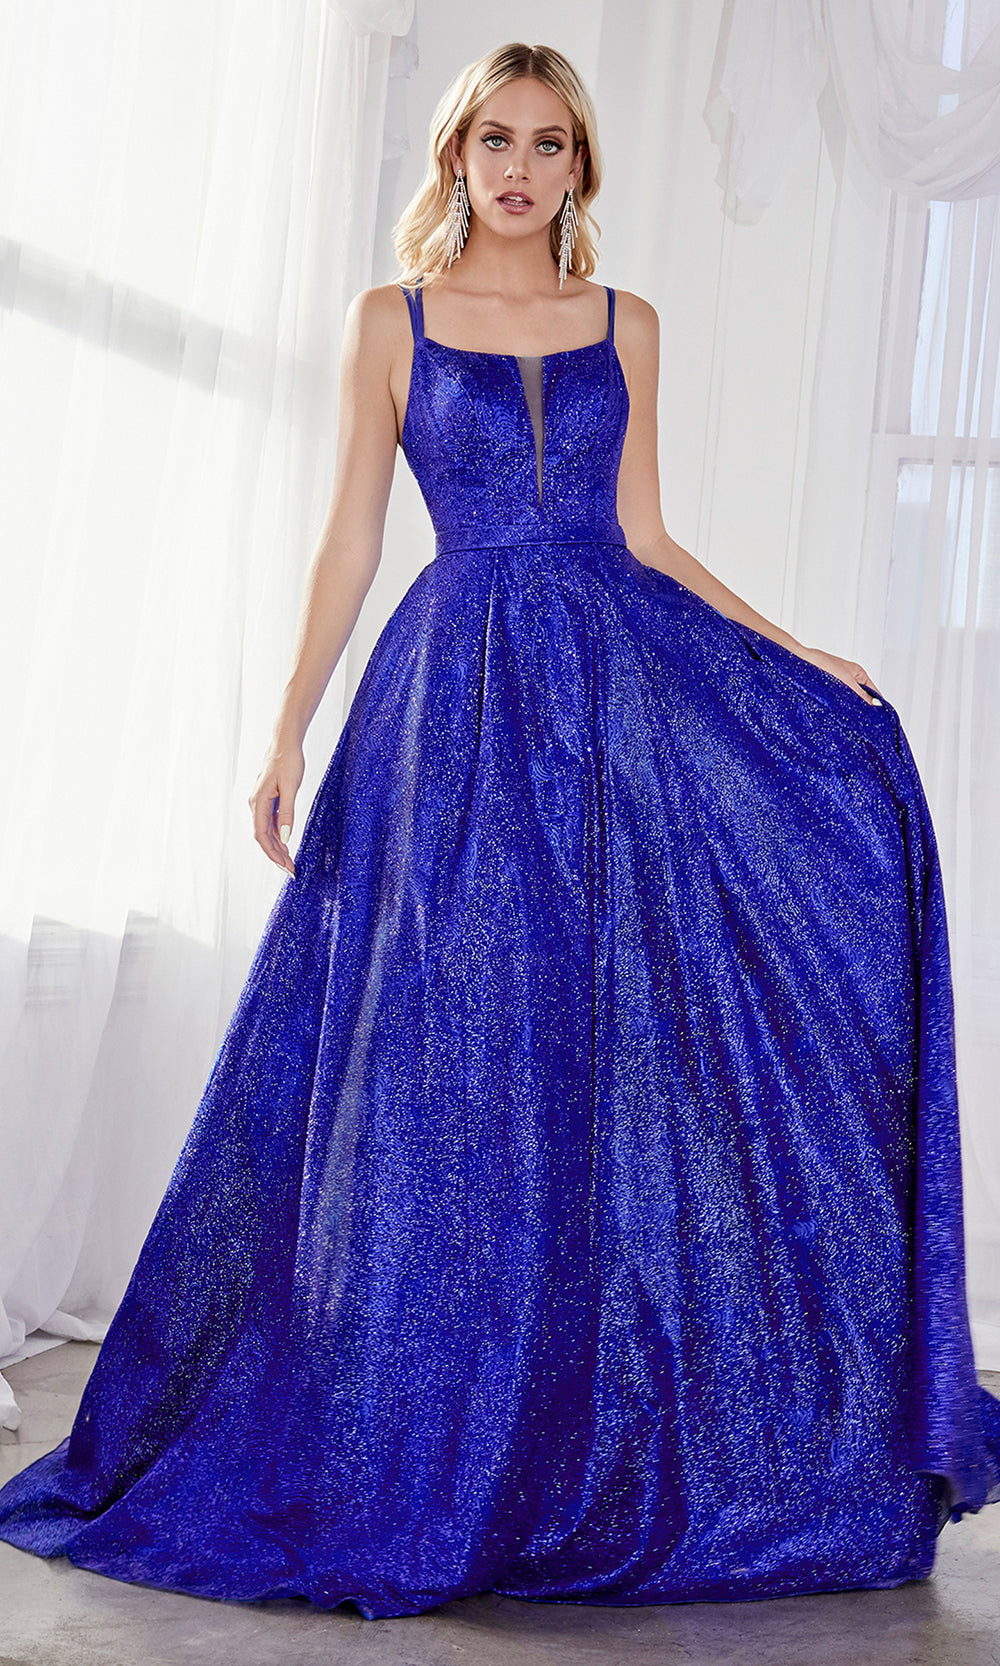 Cinderella Divine CB051 long royal blue metallic beaded dress with straps. Perfect royal blue evening dress for prom, quinceanera dress, indowestern gown, prom, engagement/wedding reception, debut, sweet 16. Sweet 15.Plus sizes available.jpg